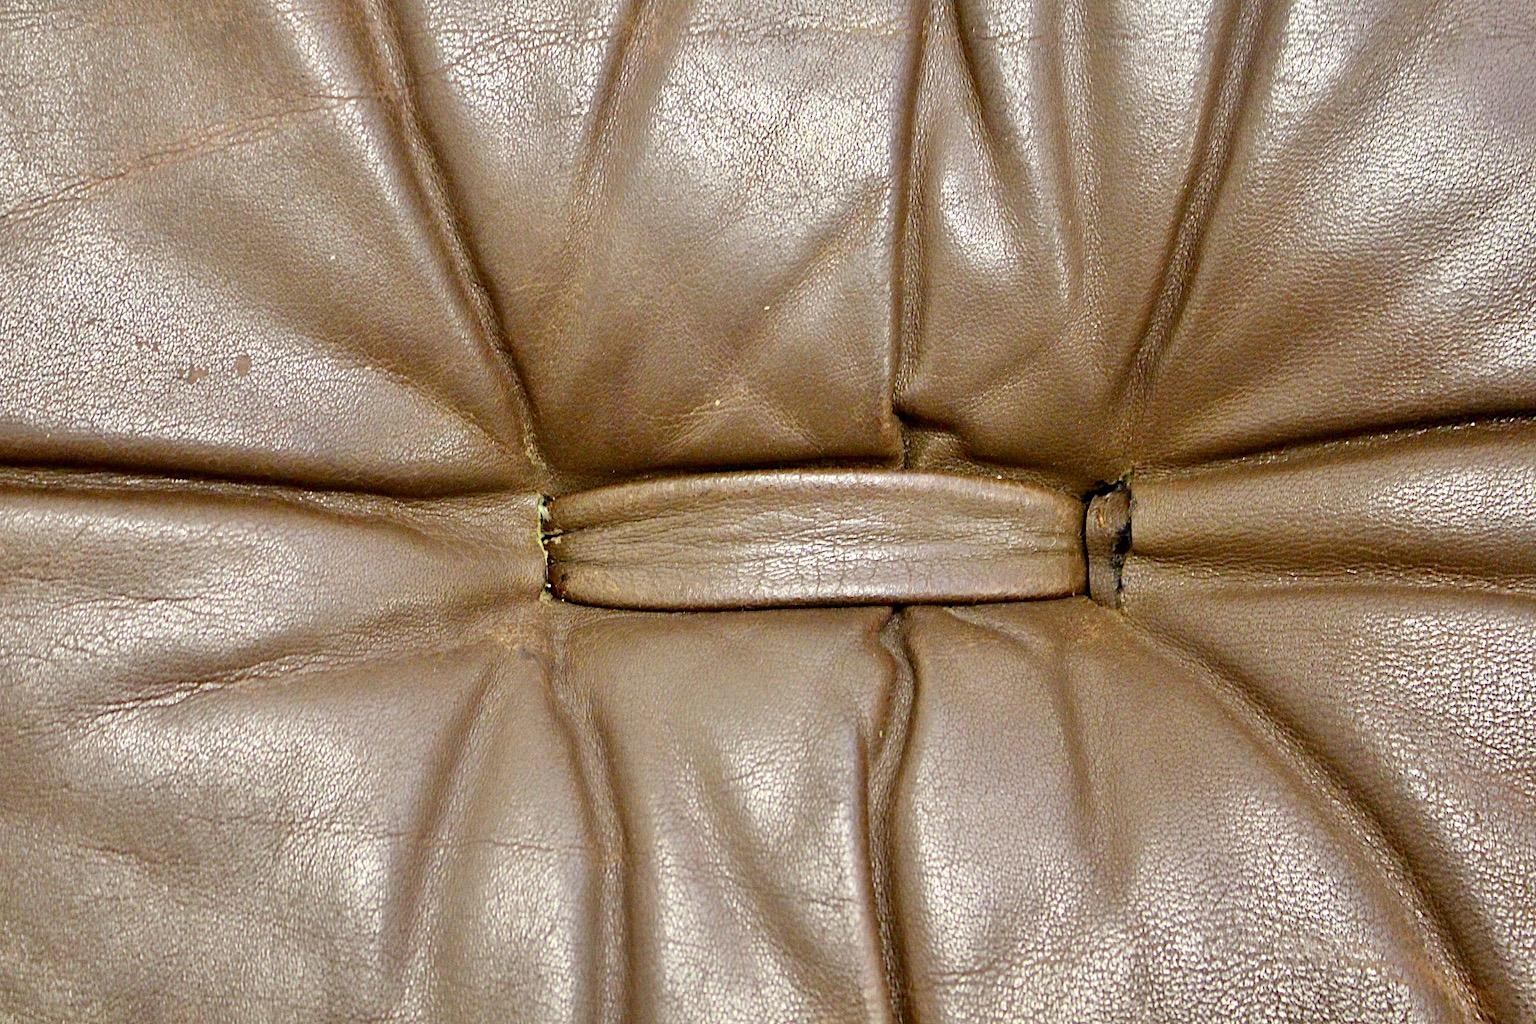 Wittmann Leather Brown Vintage Sofa or Daybed Atrium De Sede Style 1970s Austria For Sale 1